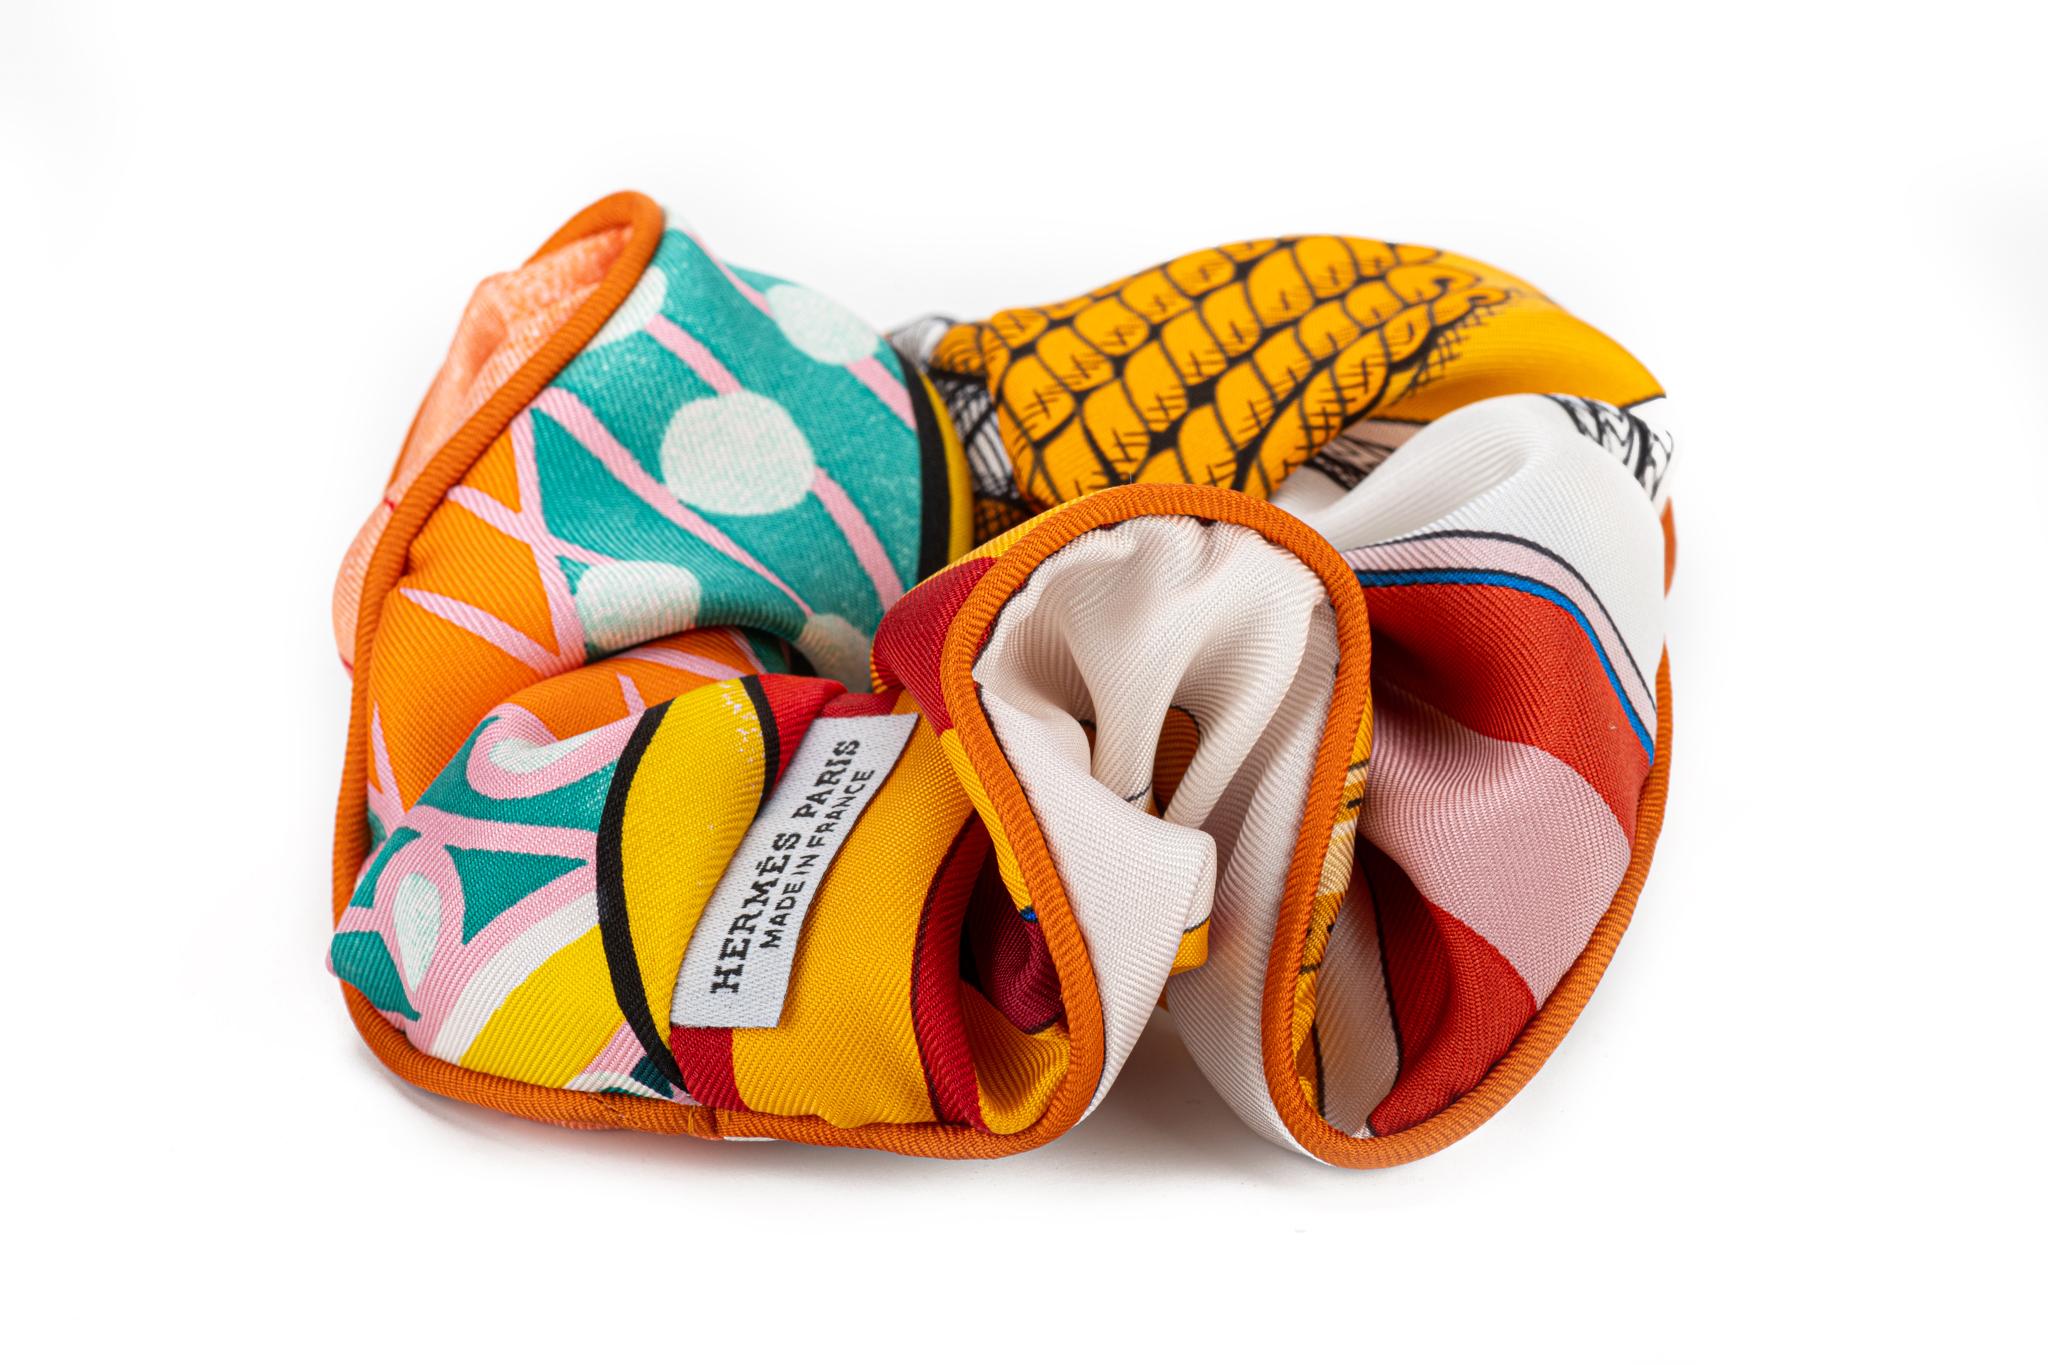 Hermes brand new in box orange silk scrunchie. The pattern can vary from one item to another. Being cut from a multicolor and multi pattern scarf will result in variations of the same chouchou. The piping is the only consistent factor and can be a